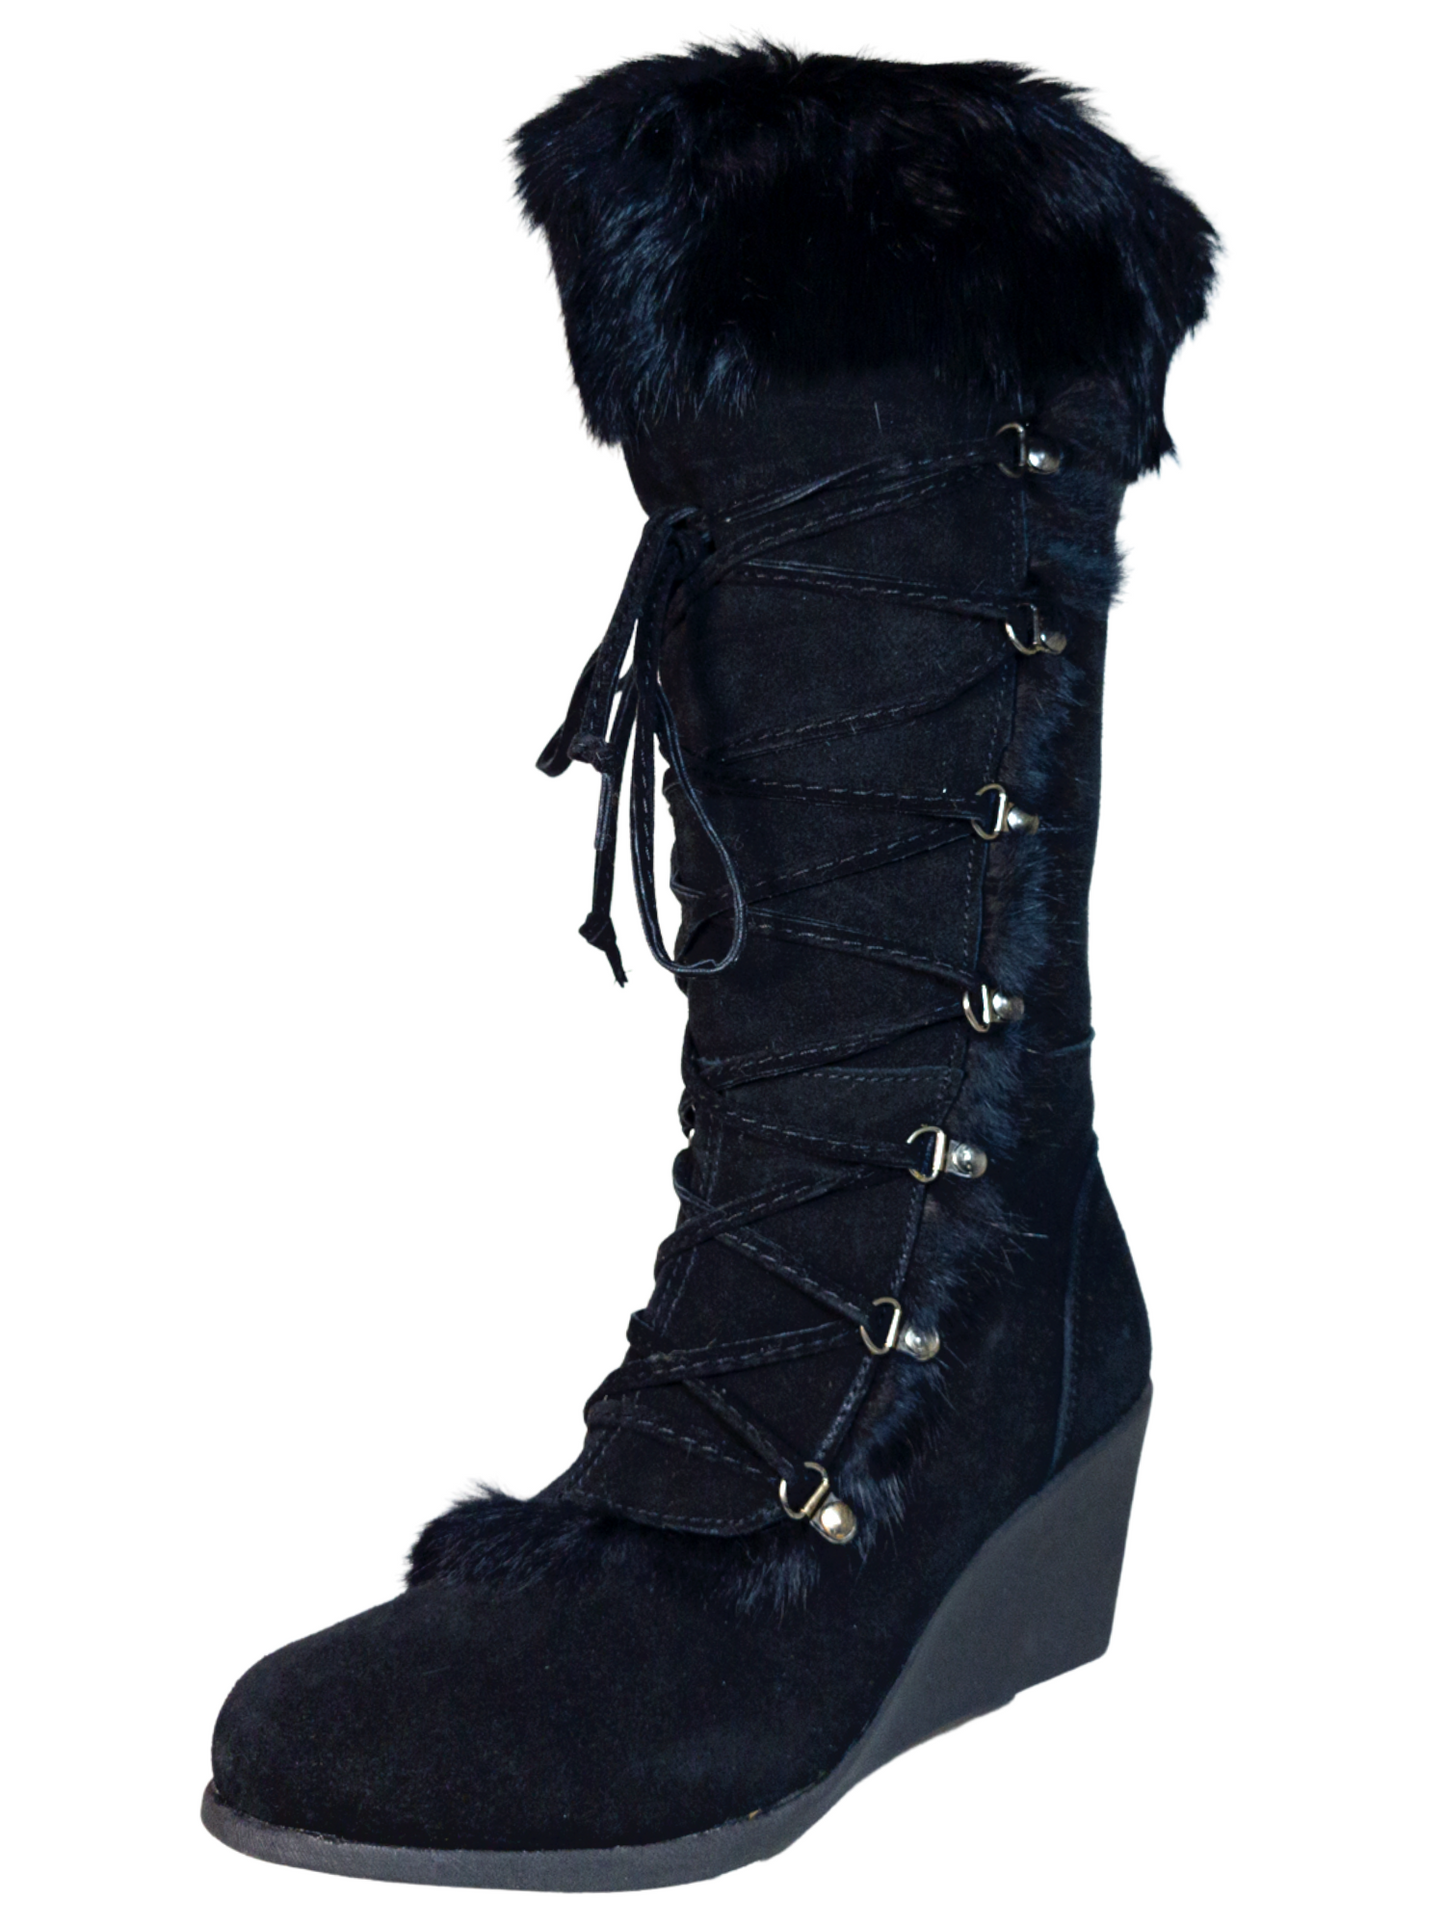 Suede Leather / Rabbit Hair Wedge Winter Boots for Women 'Bearpaw' - ID: 7132